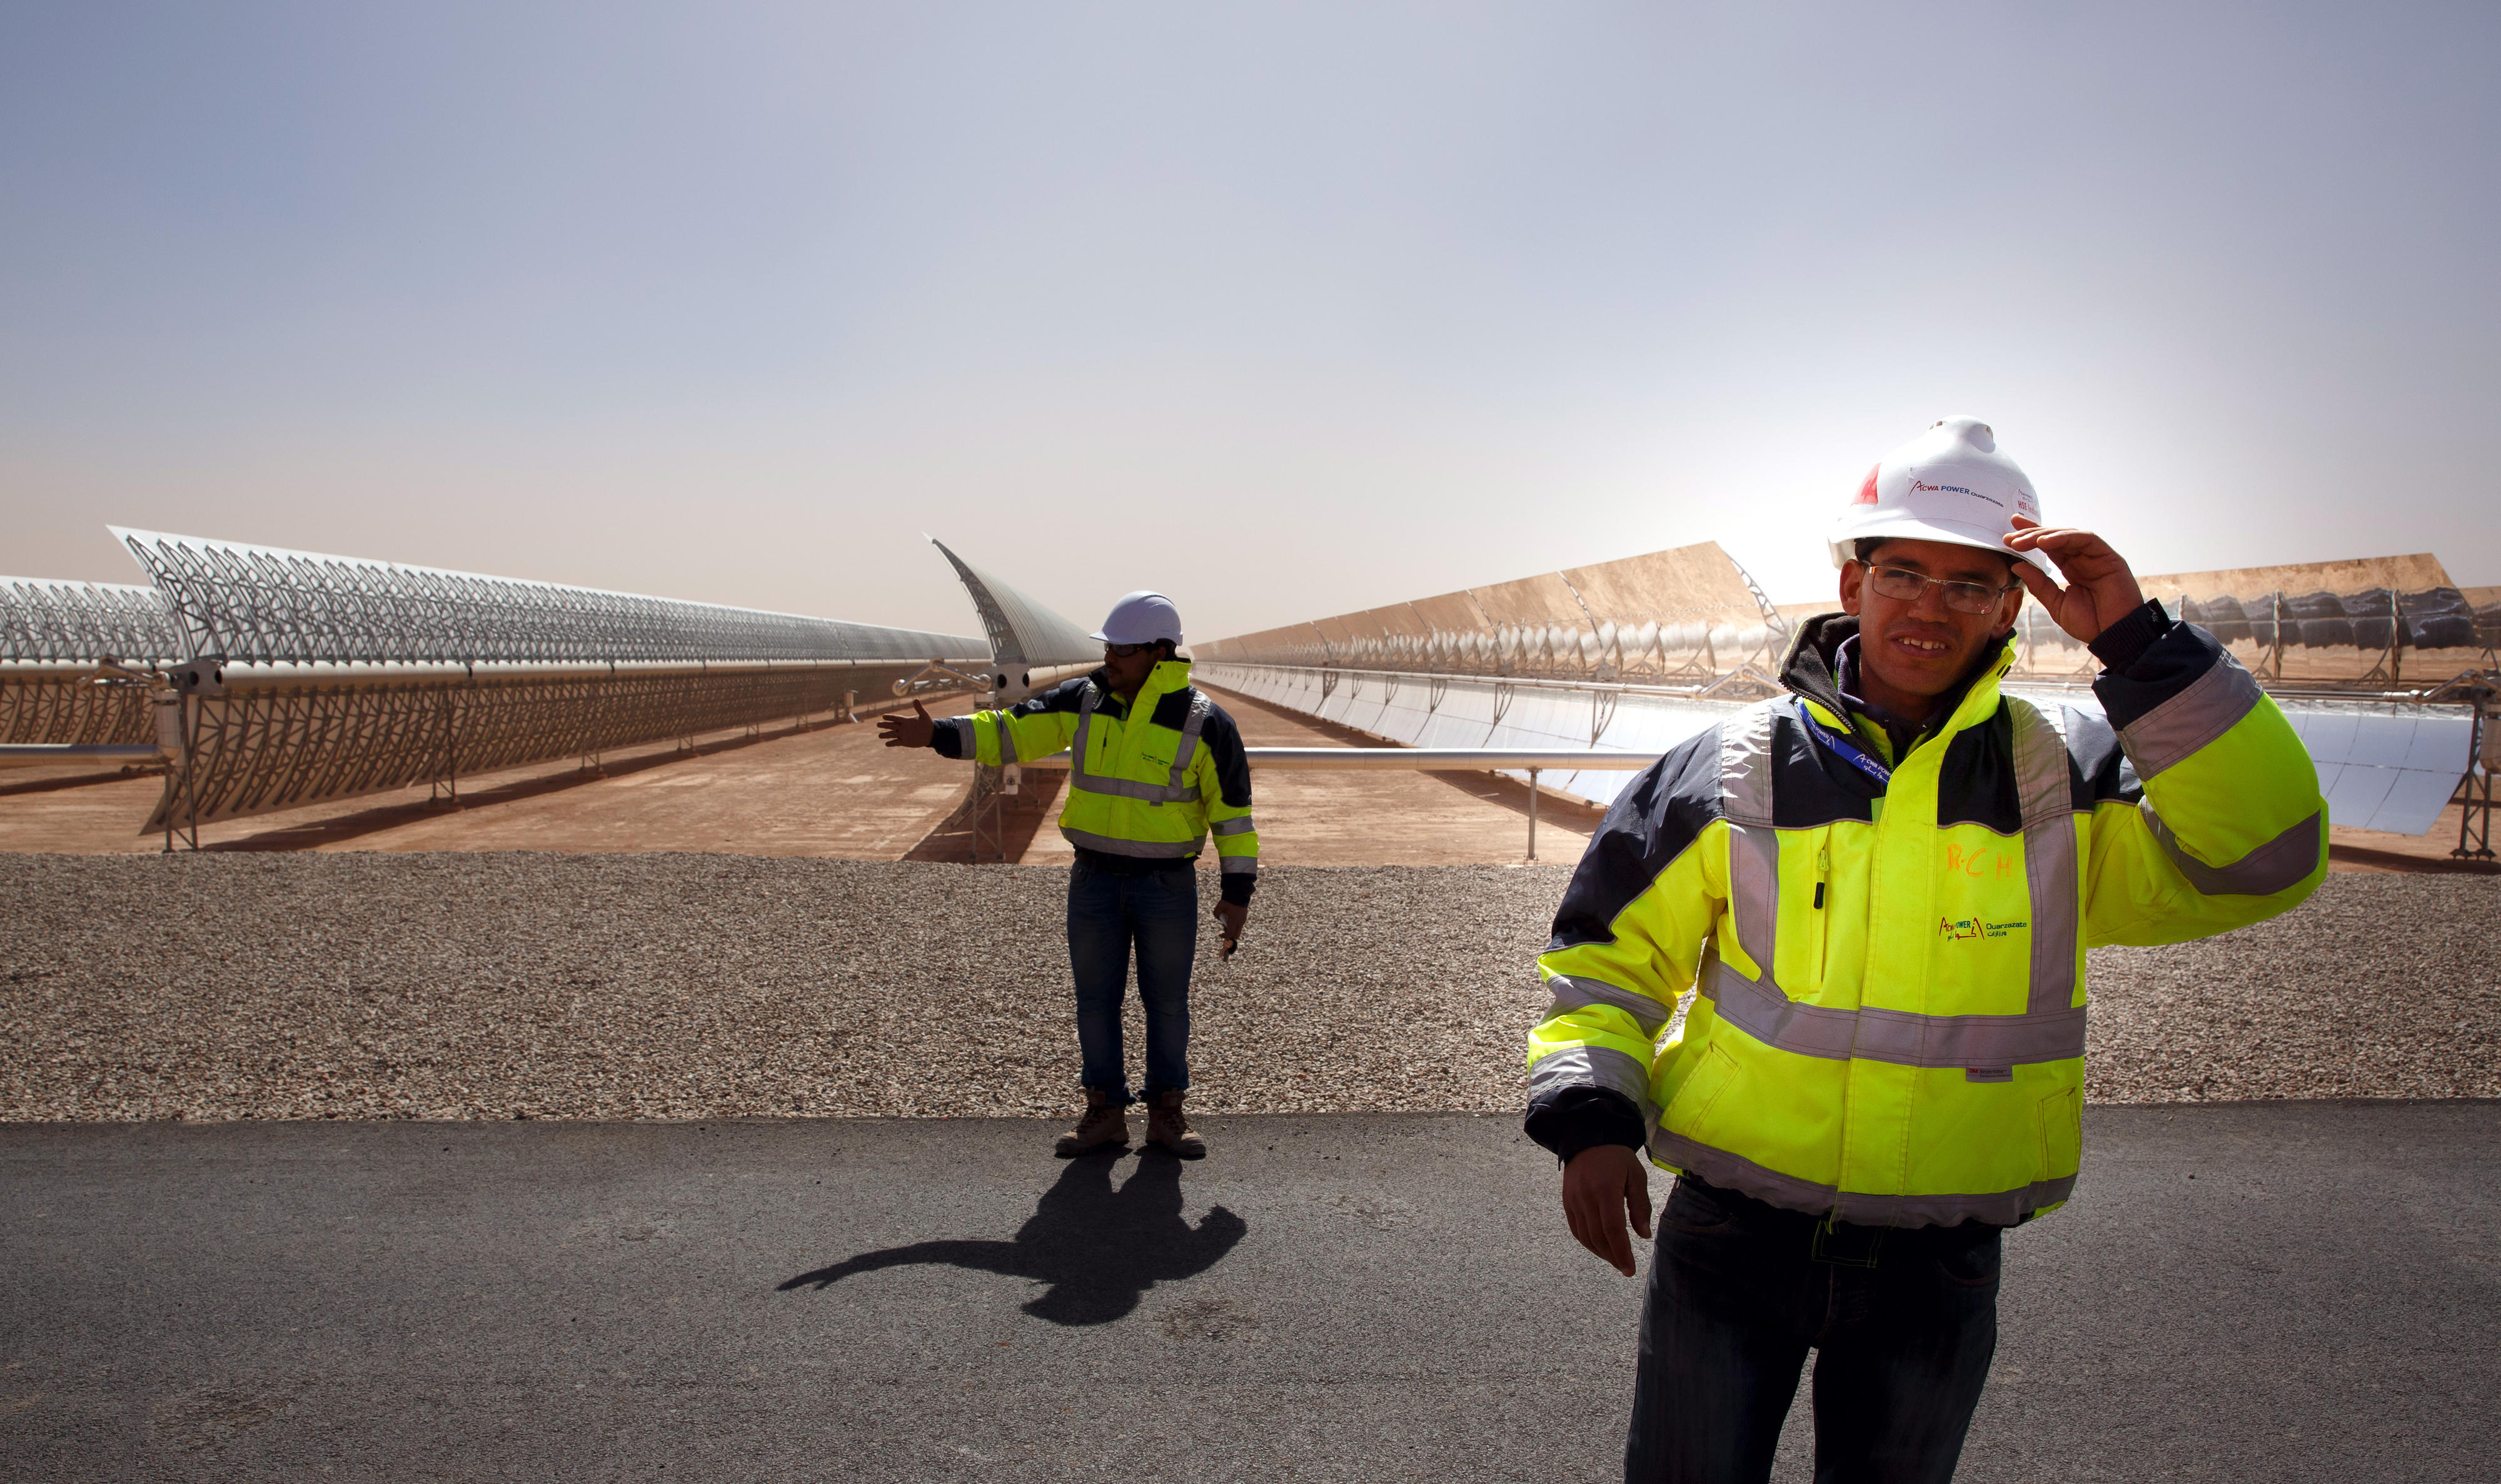 Employees of the solar power plant in Ouarzazate, currently the largest solar power plant in the world